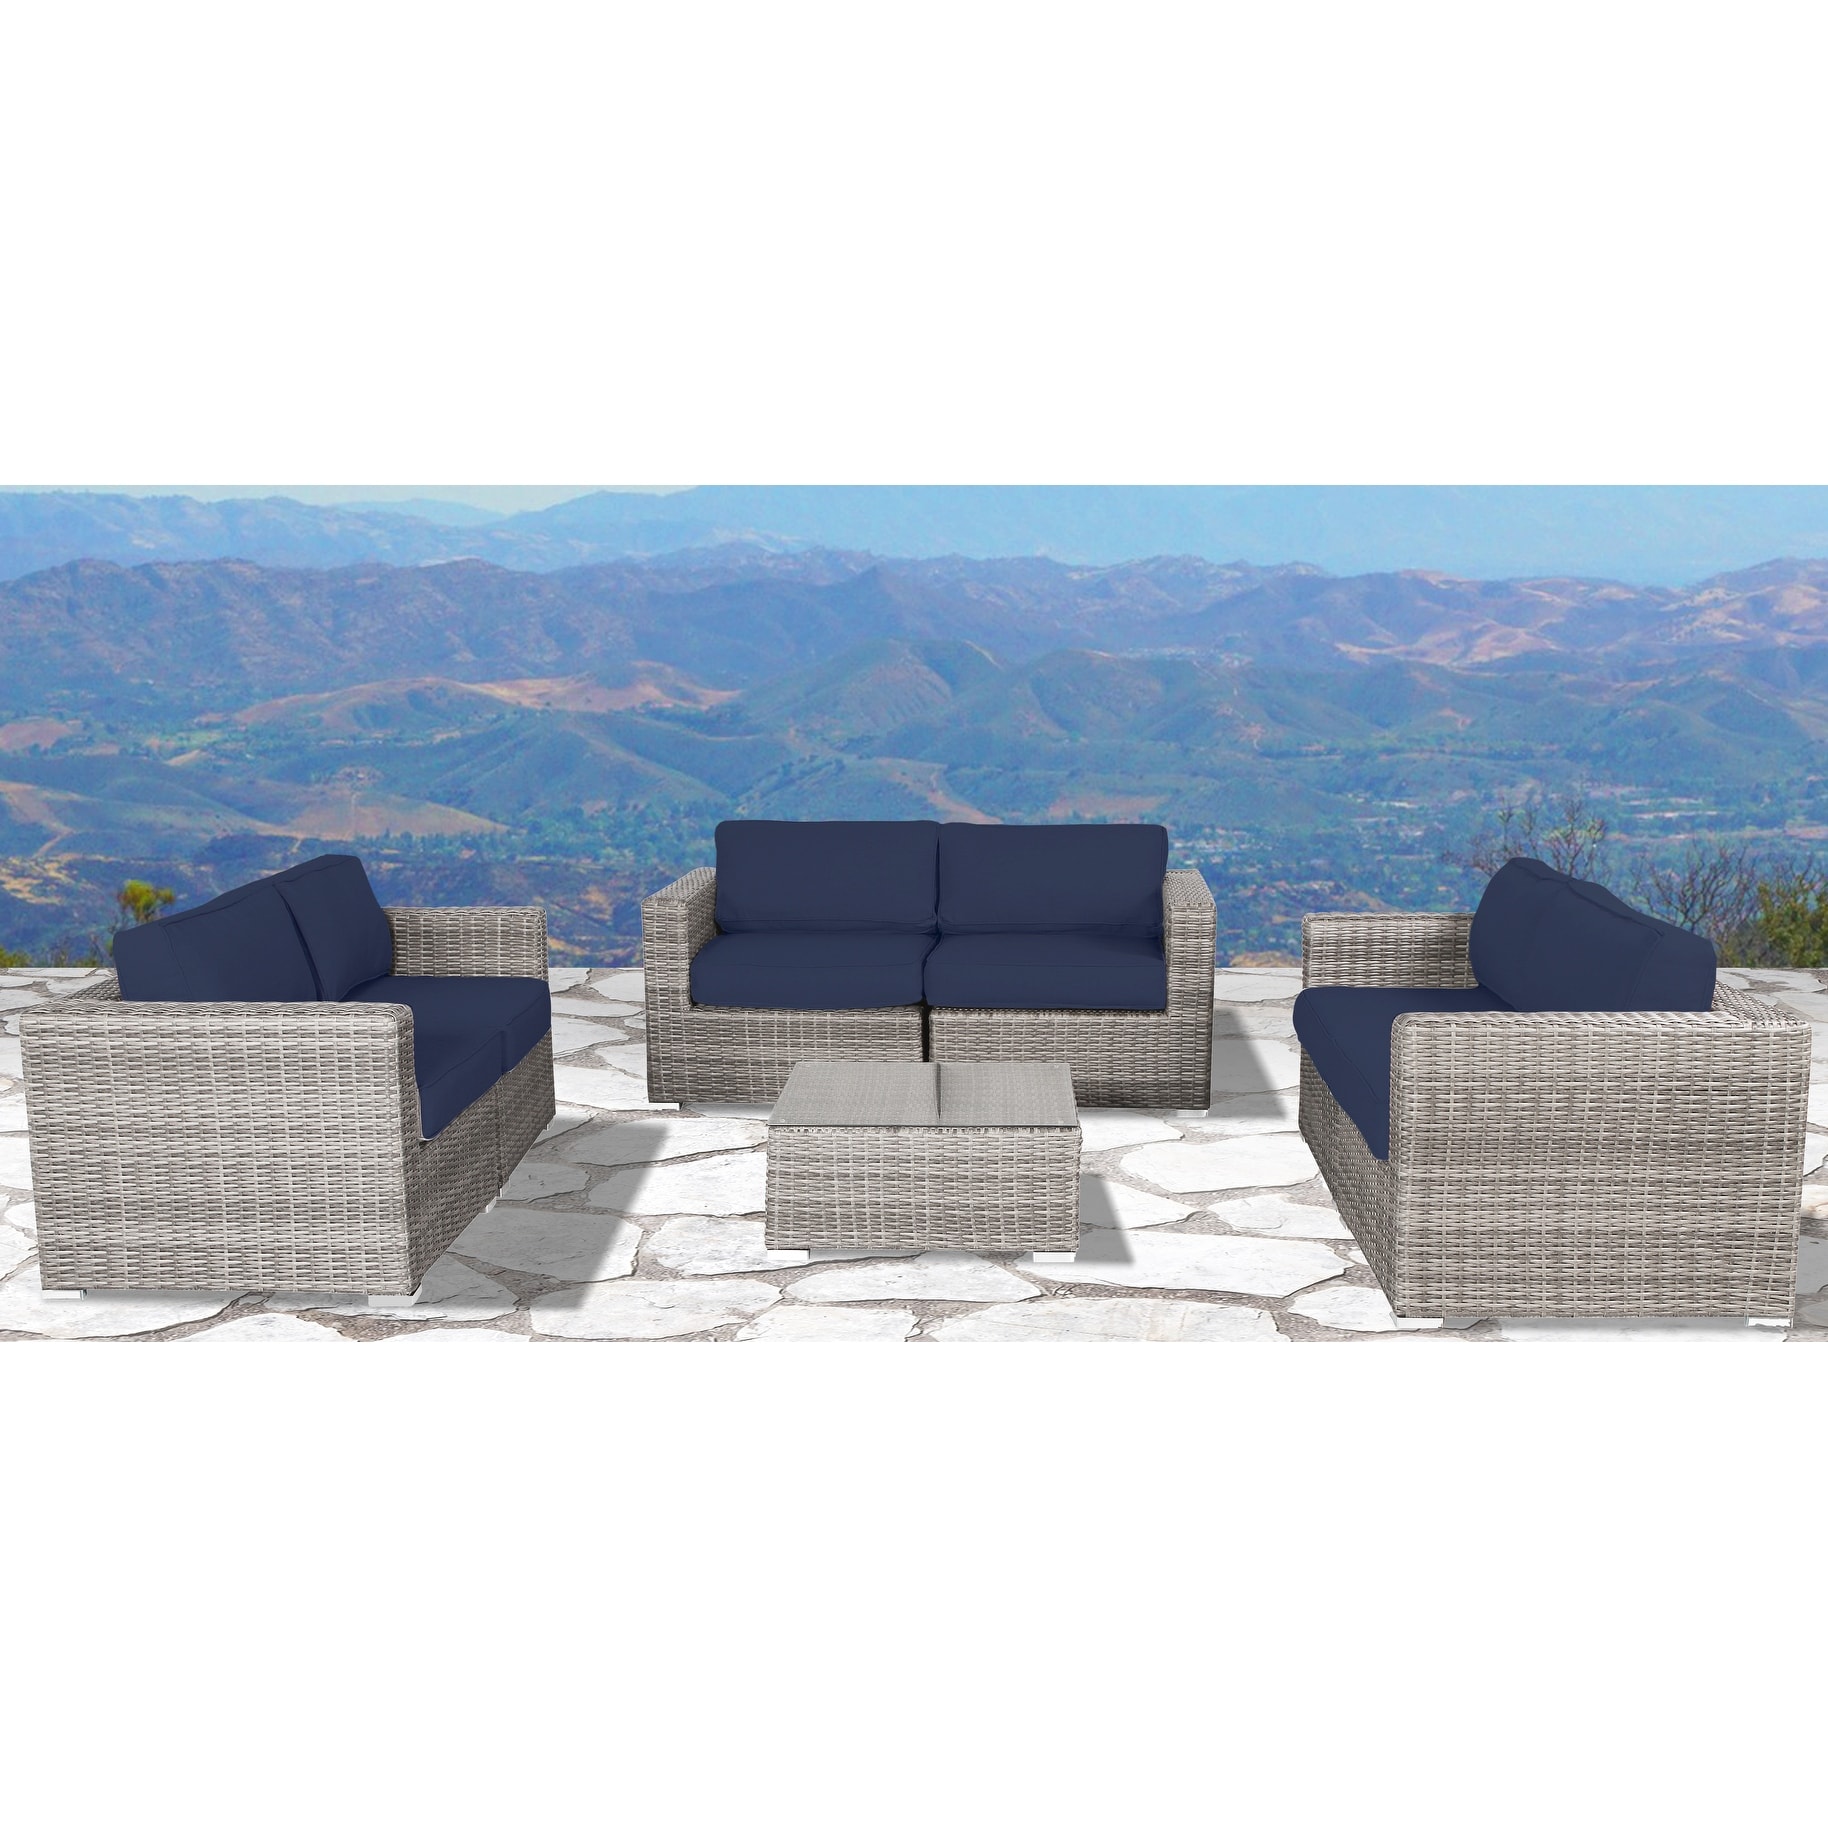 Wicker/rattan 6 - Person Seating Group With Cushions